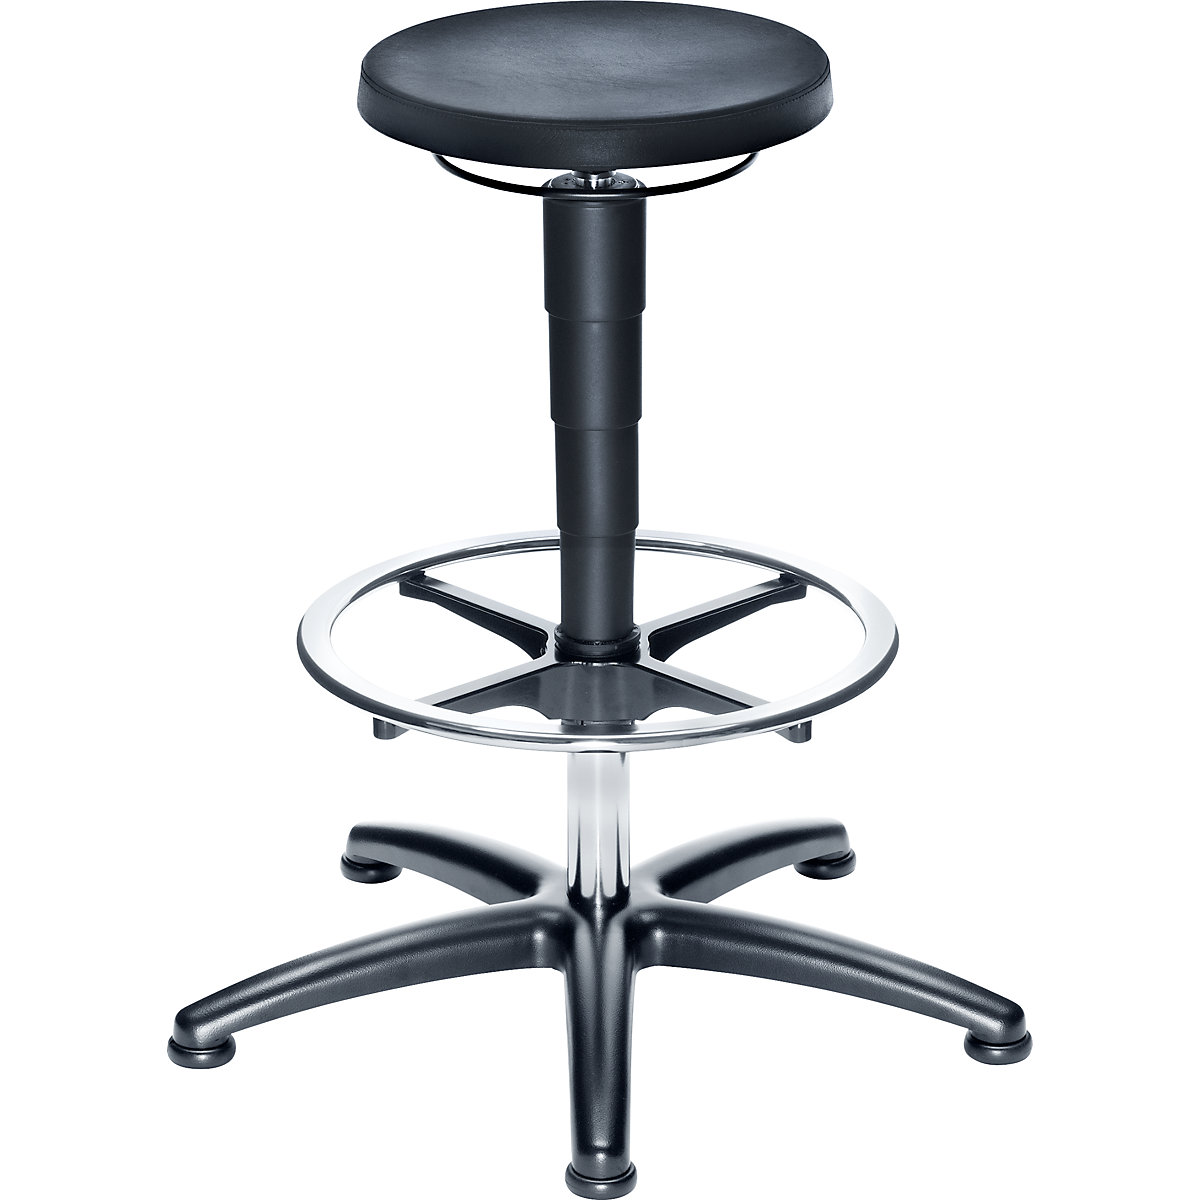 Industrial stool with gas lift height adjustment – eurokraft pro, polyurethane foam seat, with floor glides and foot ring-1